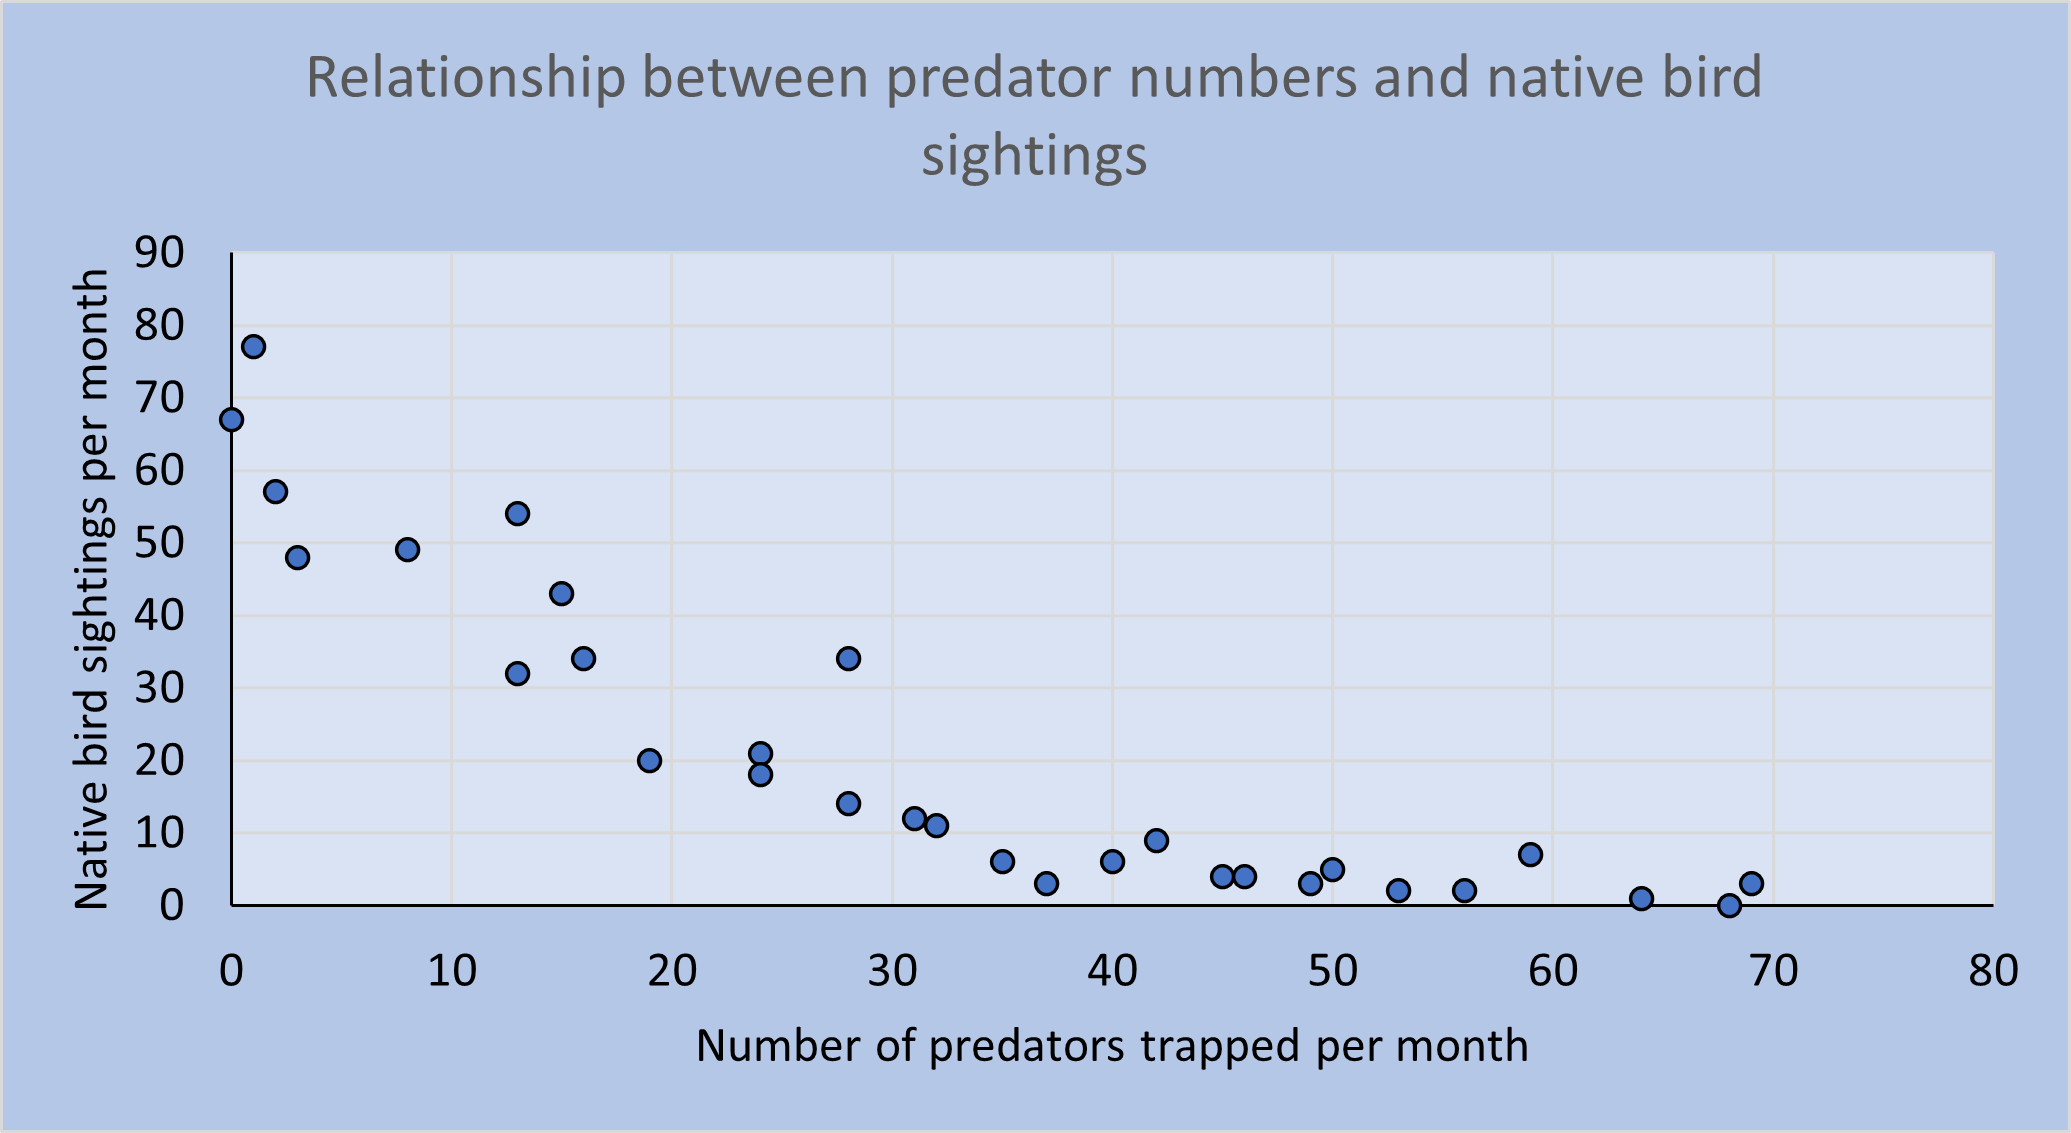 Scattergraph of the relationship between predator numbers and native bird sightings.